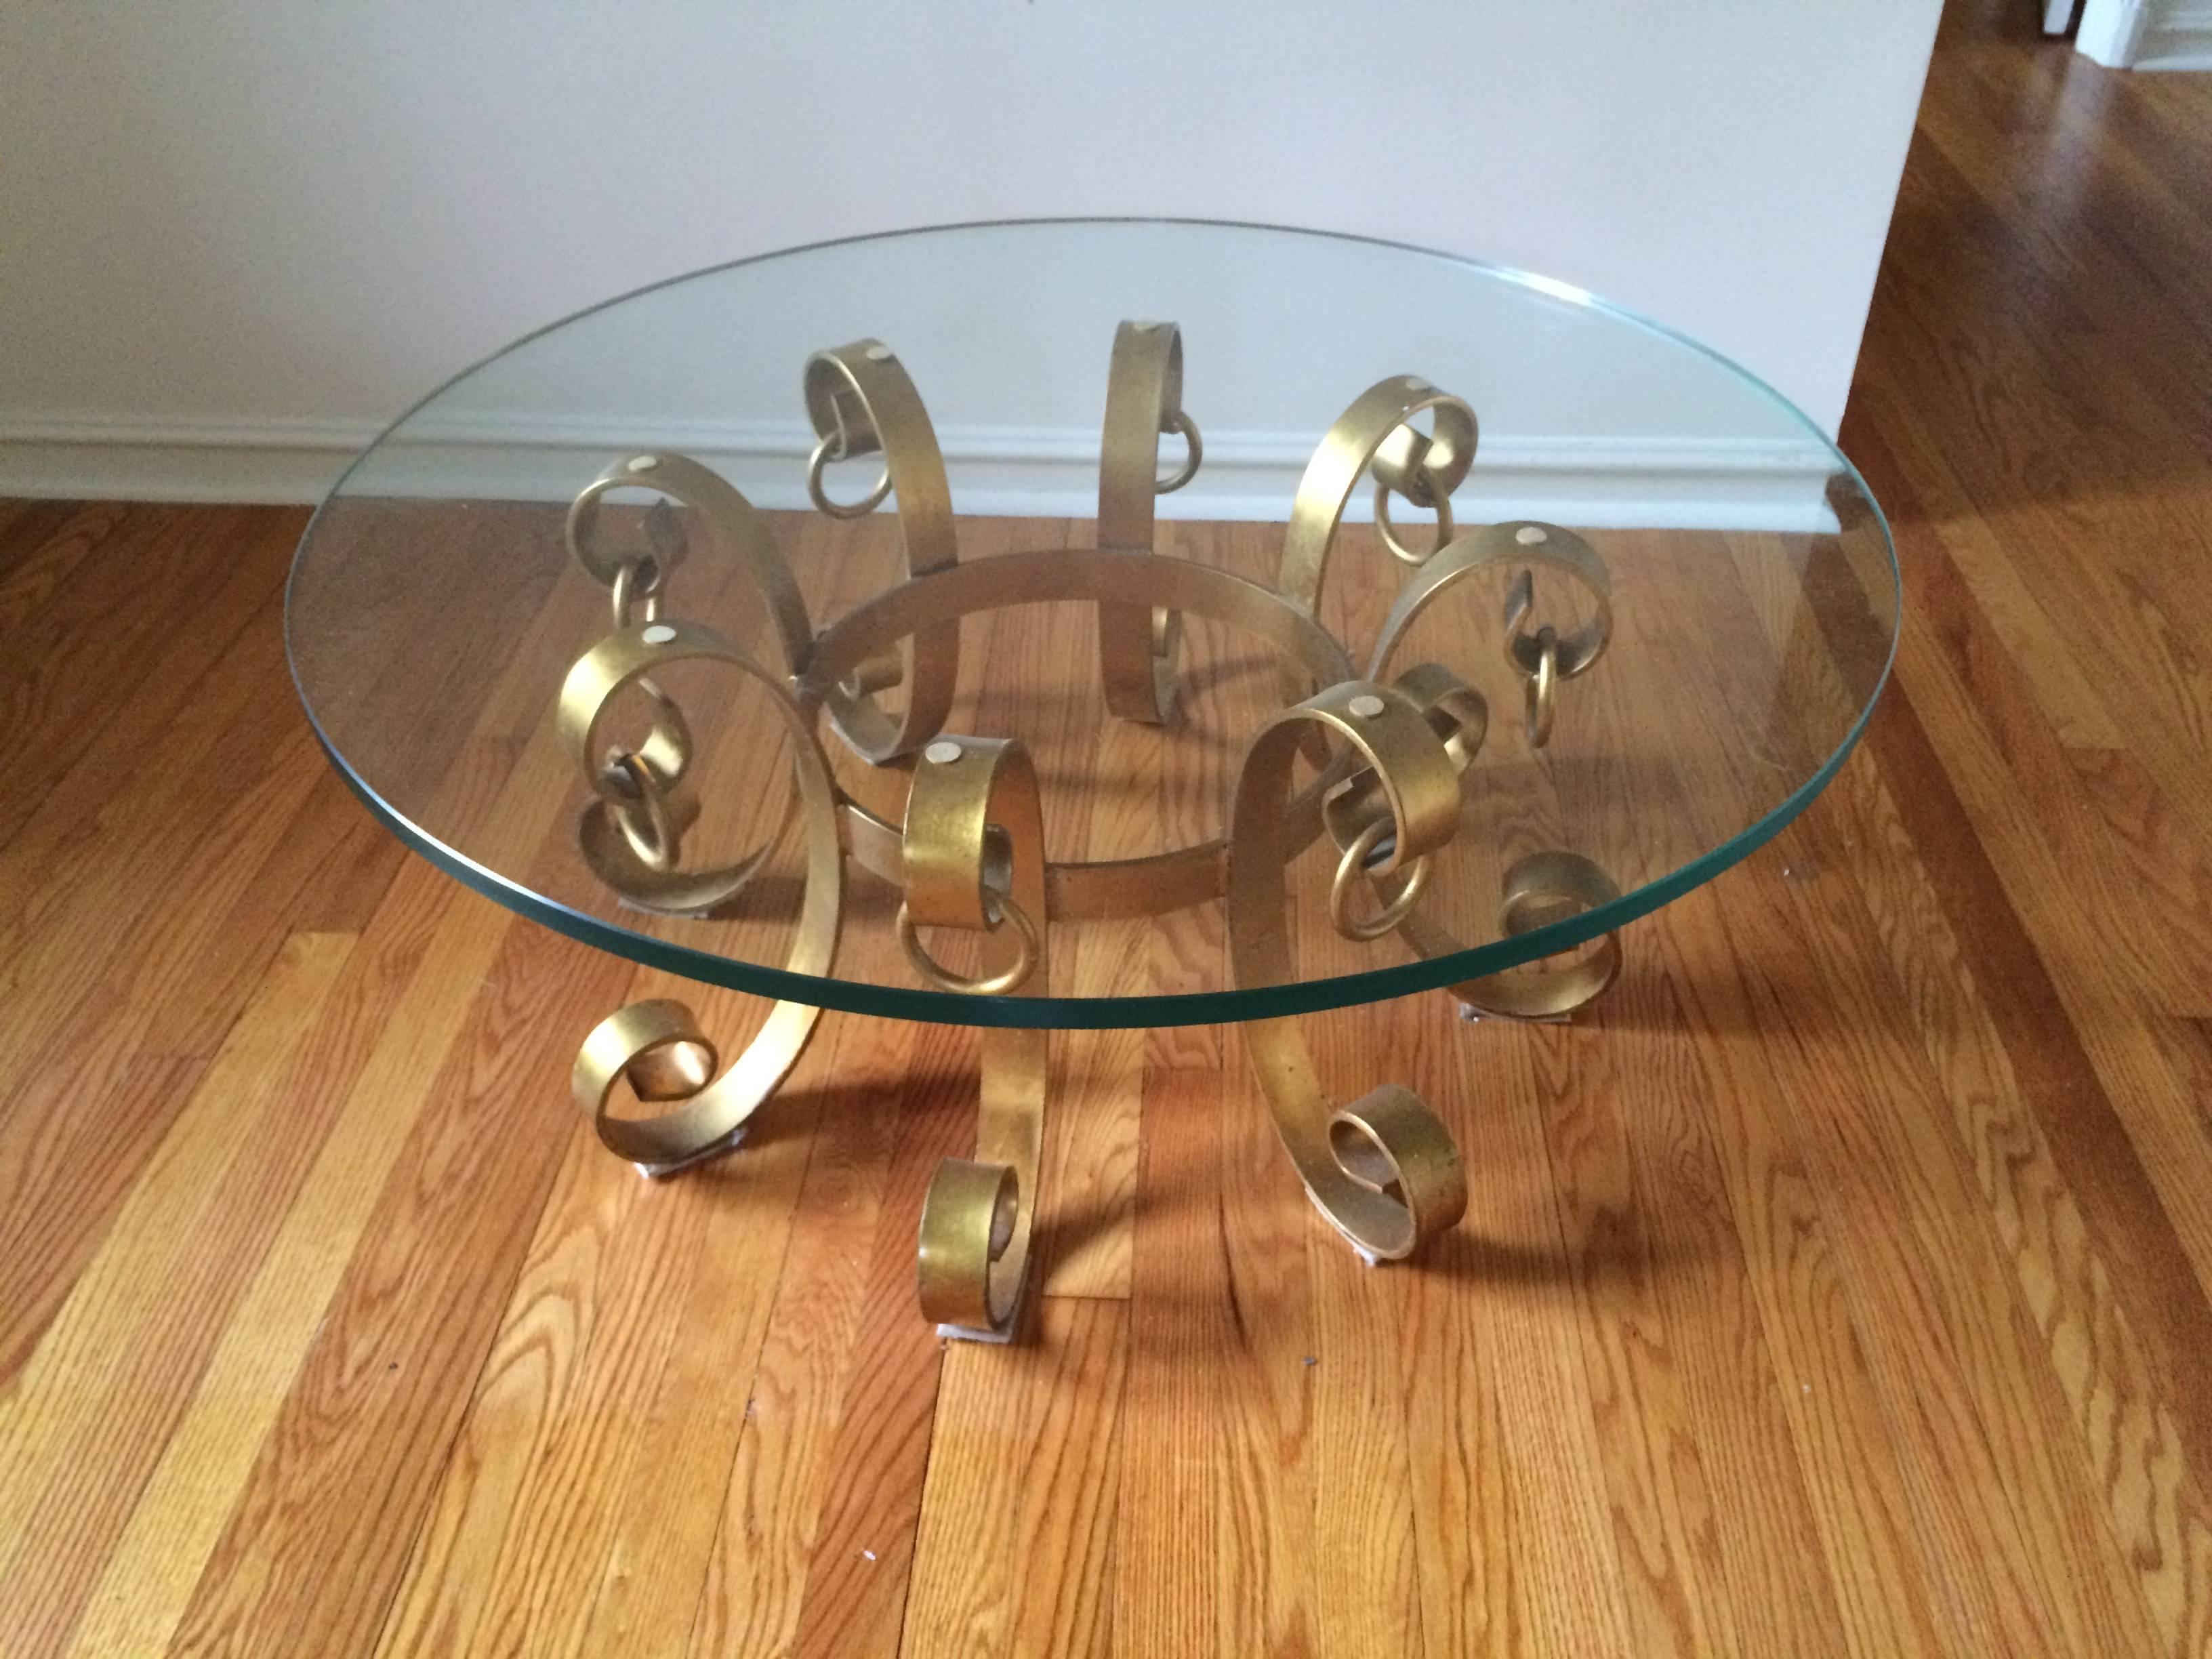 Hollywood Regency gilt iron coffee table. This elegant table boasts heavy iron construction .This is a solid well built piece. We need the floor space so this is a bargain.
Please note that the The original thick glass top in the first two photos is